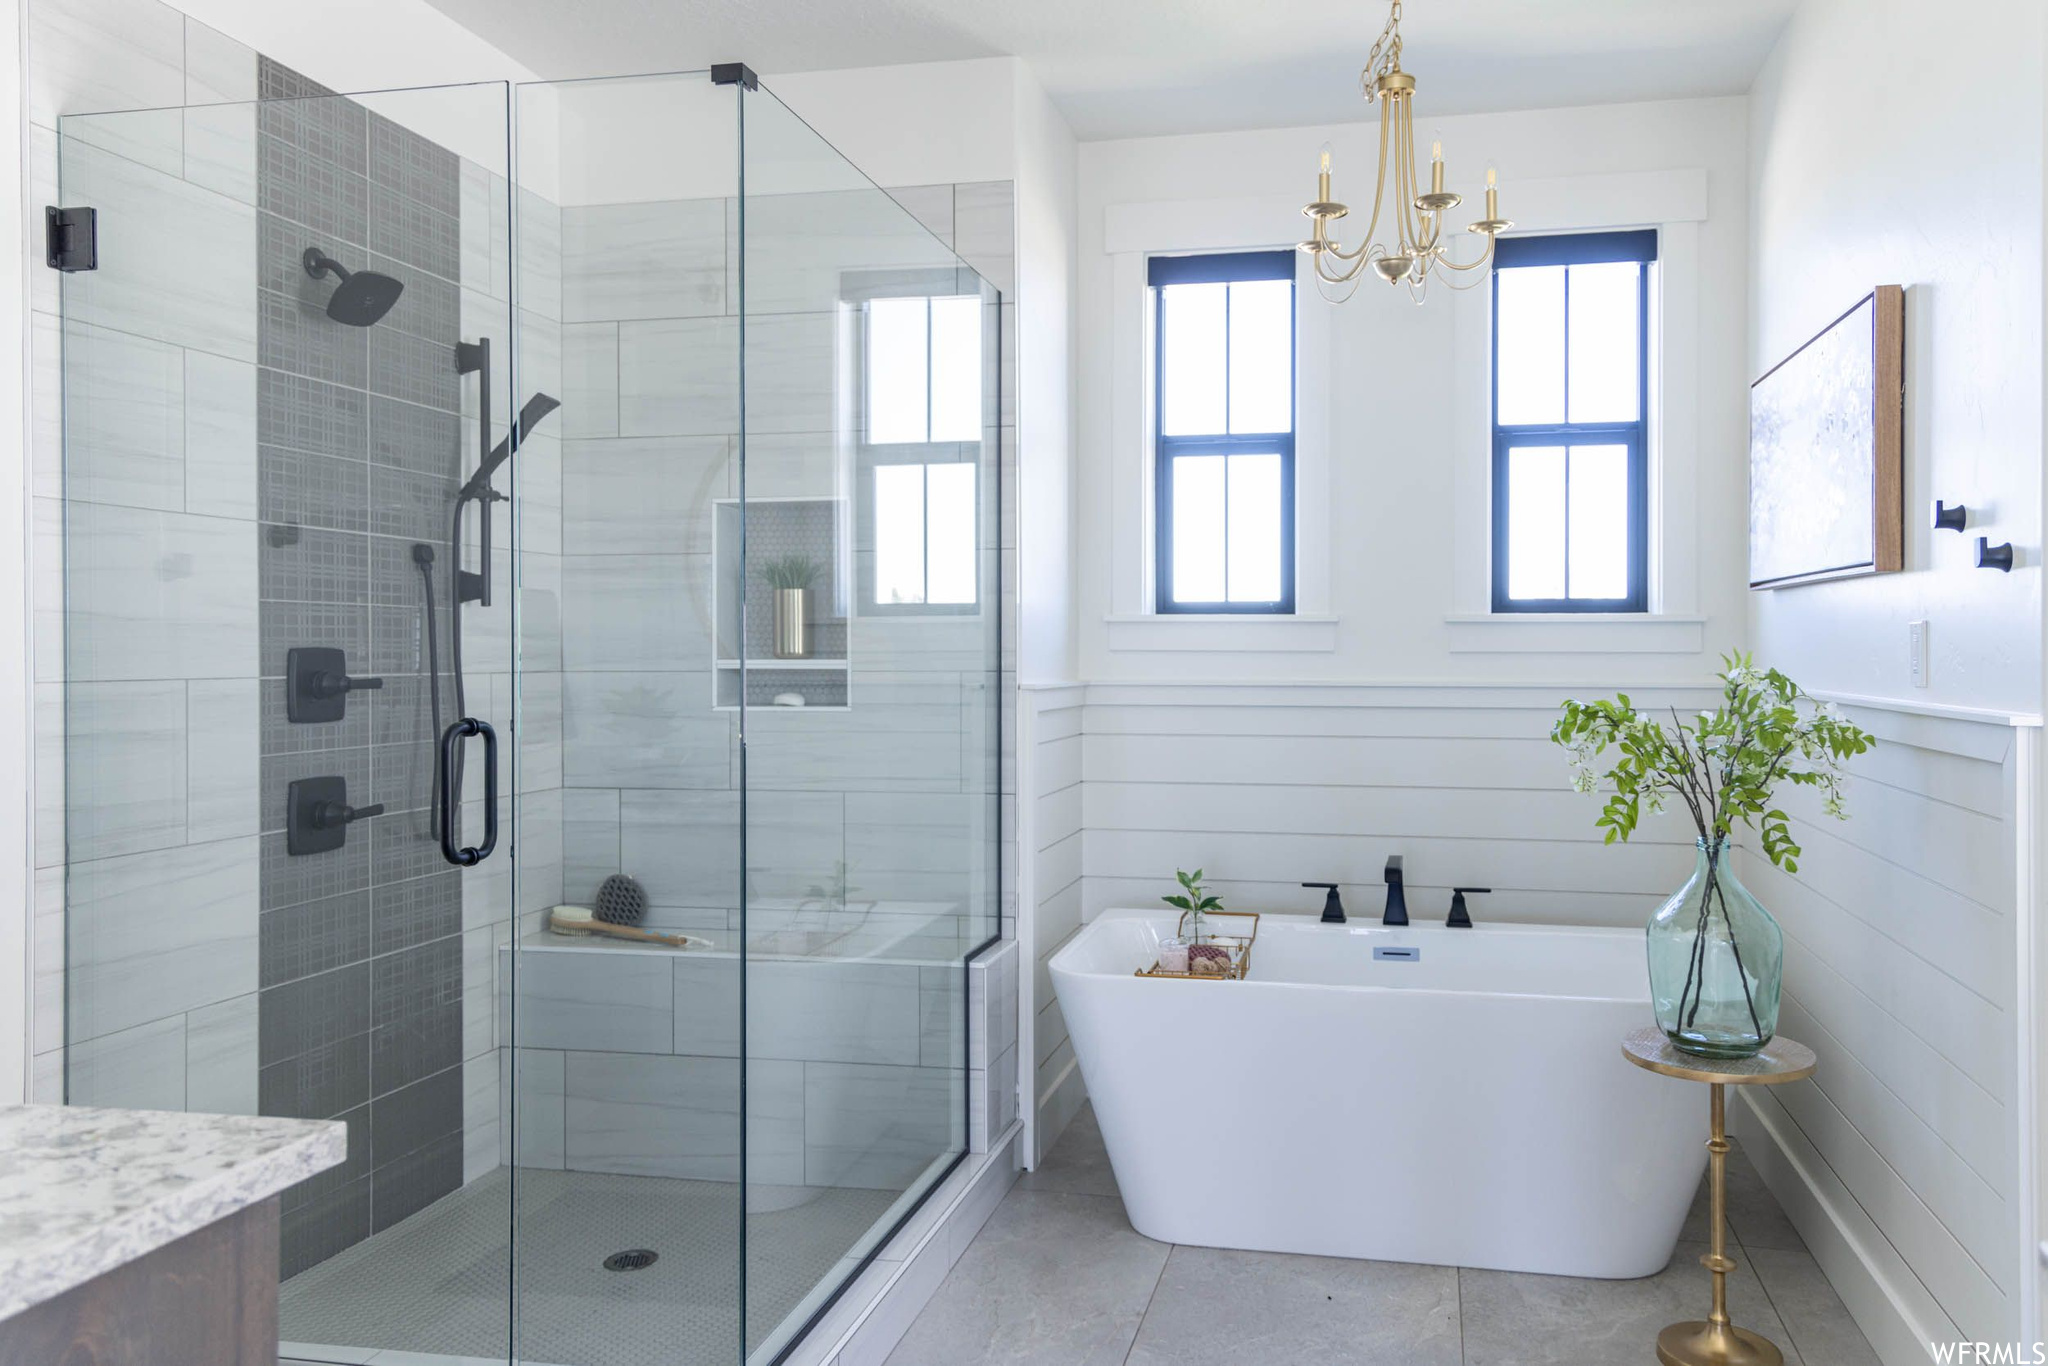 Bathroom featuring separate shower and tub, tile walls, tile floors, and an inviting chandelier